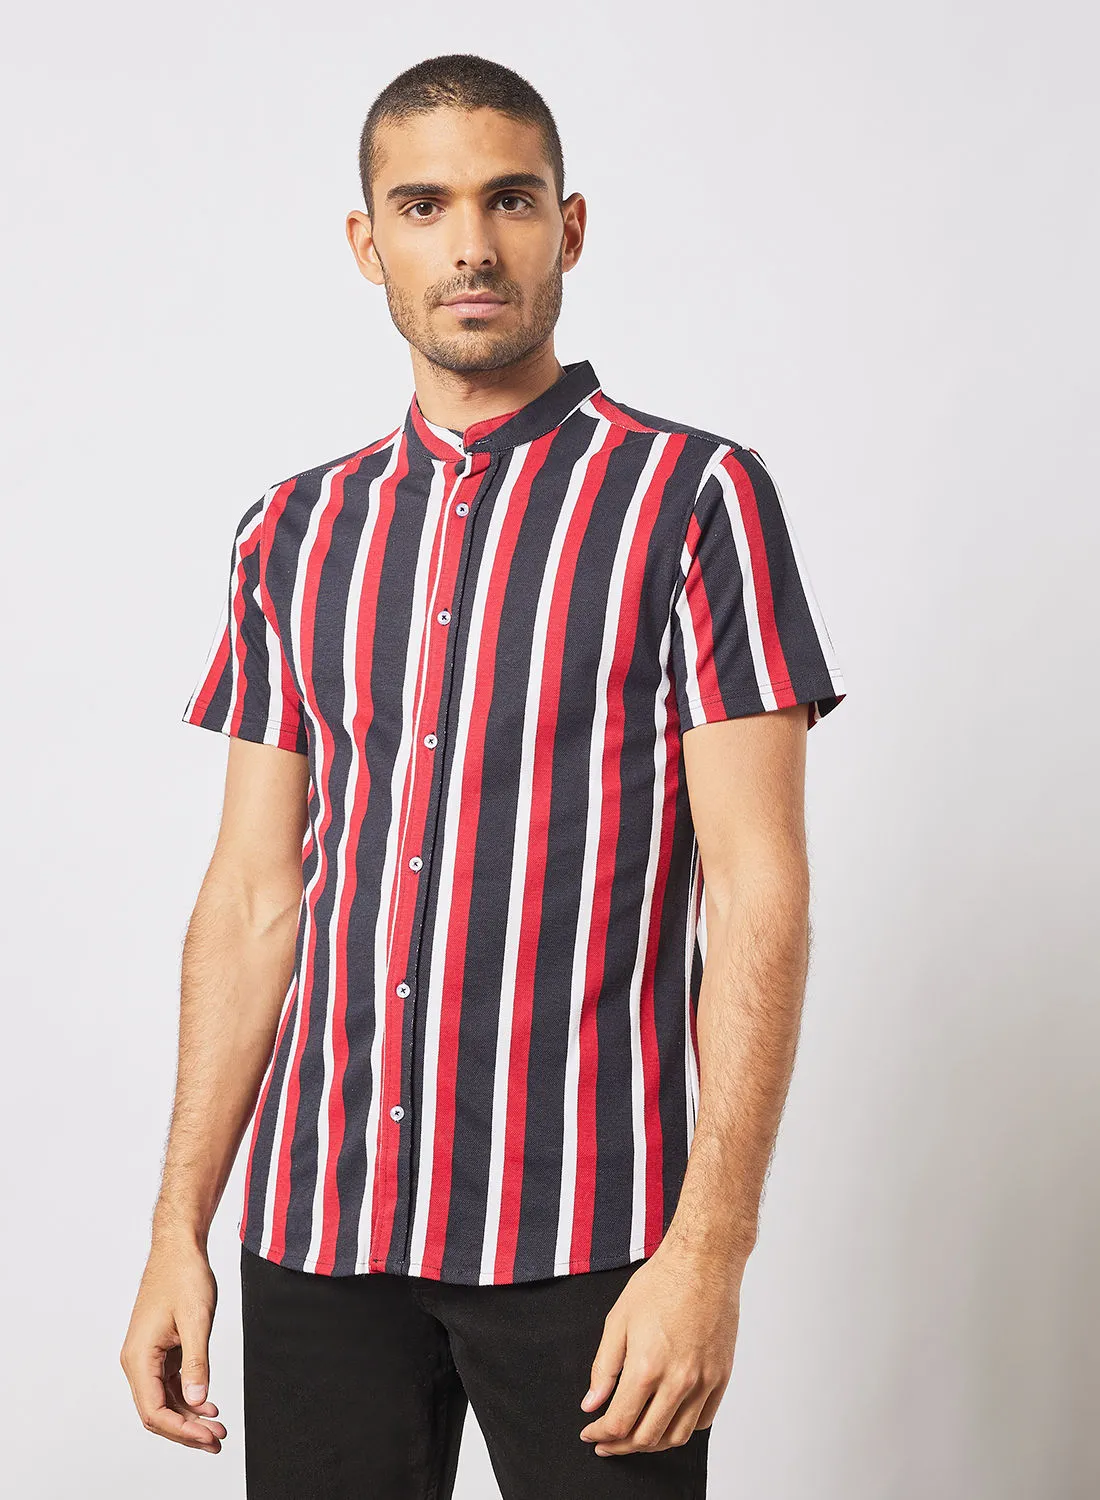 R&B Slim Fit Striped Knit Shirt With Mandarin Collar And Short Sleeves Red